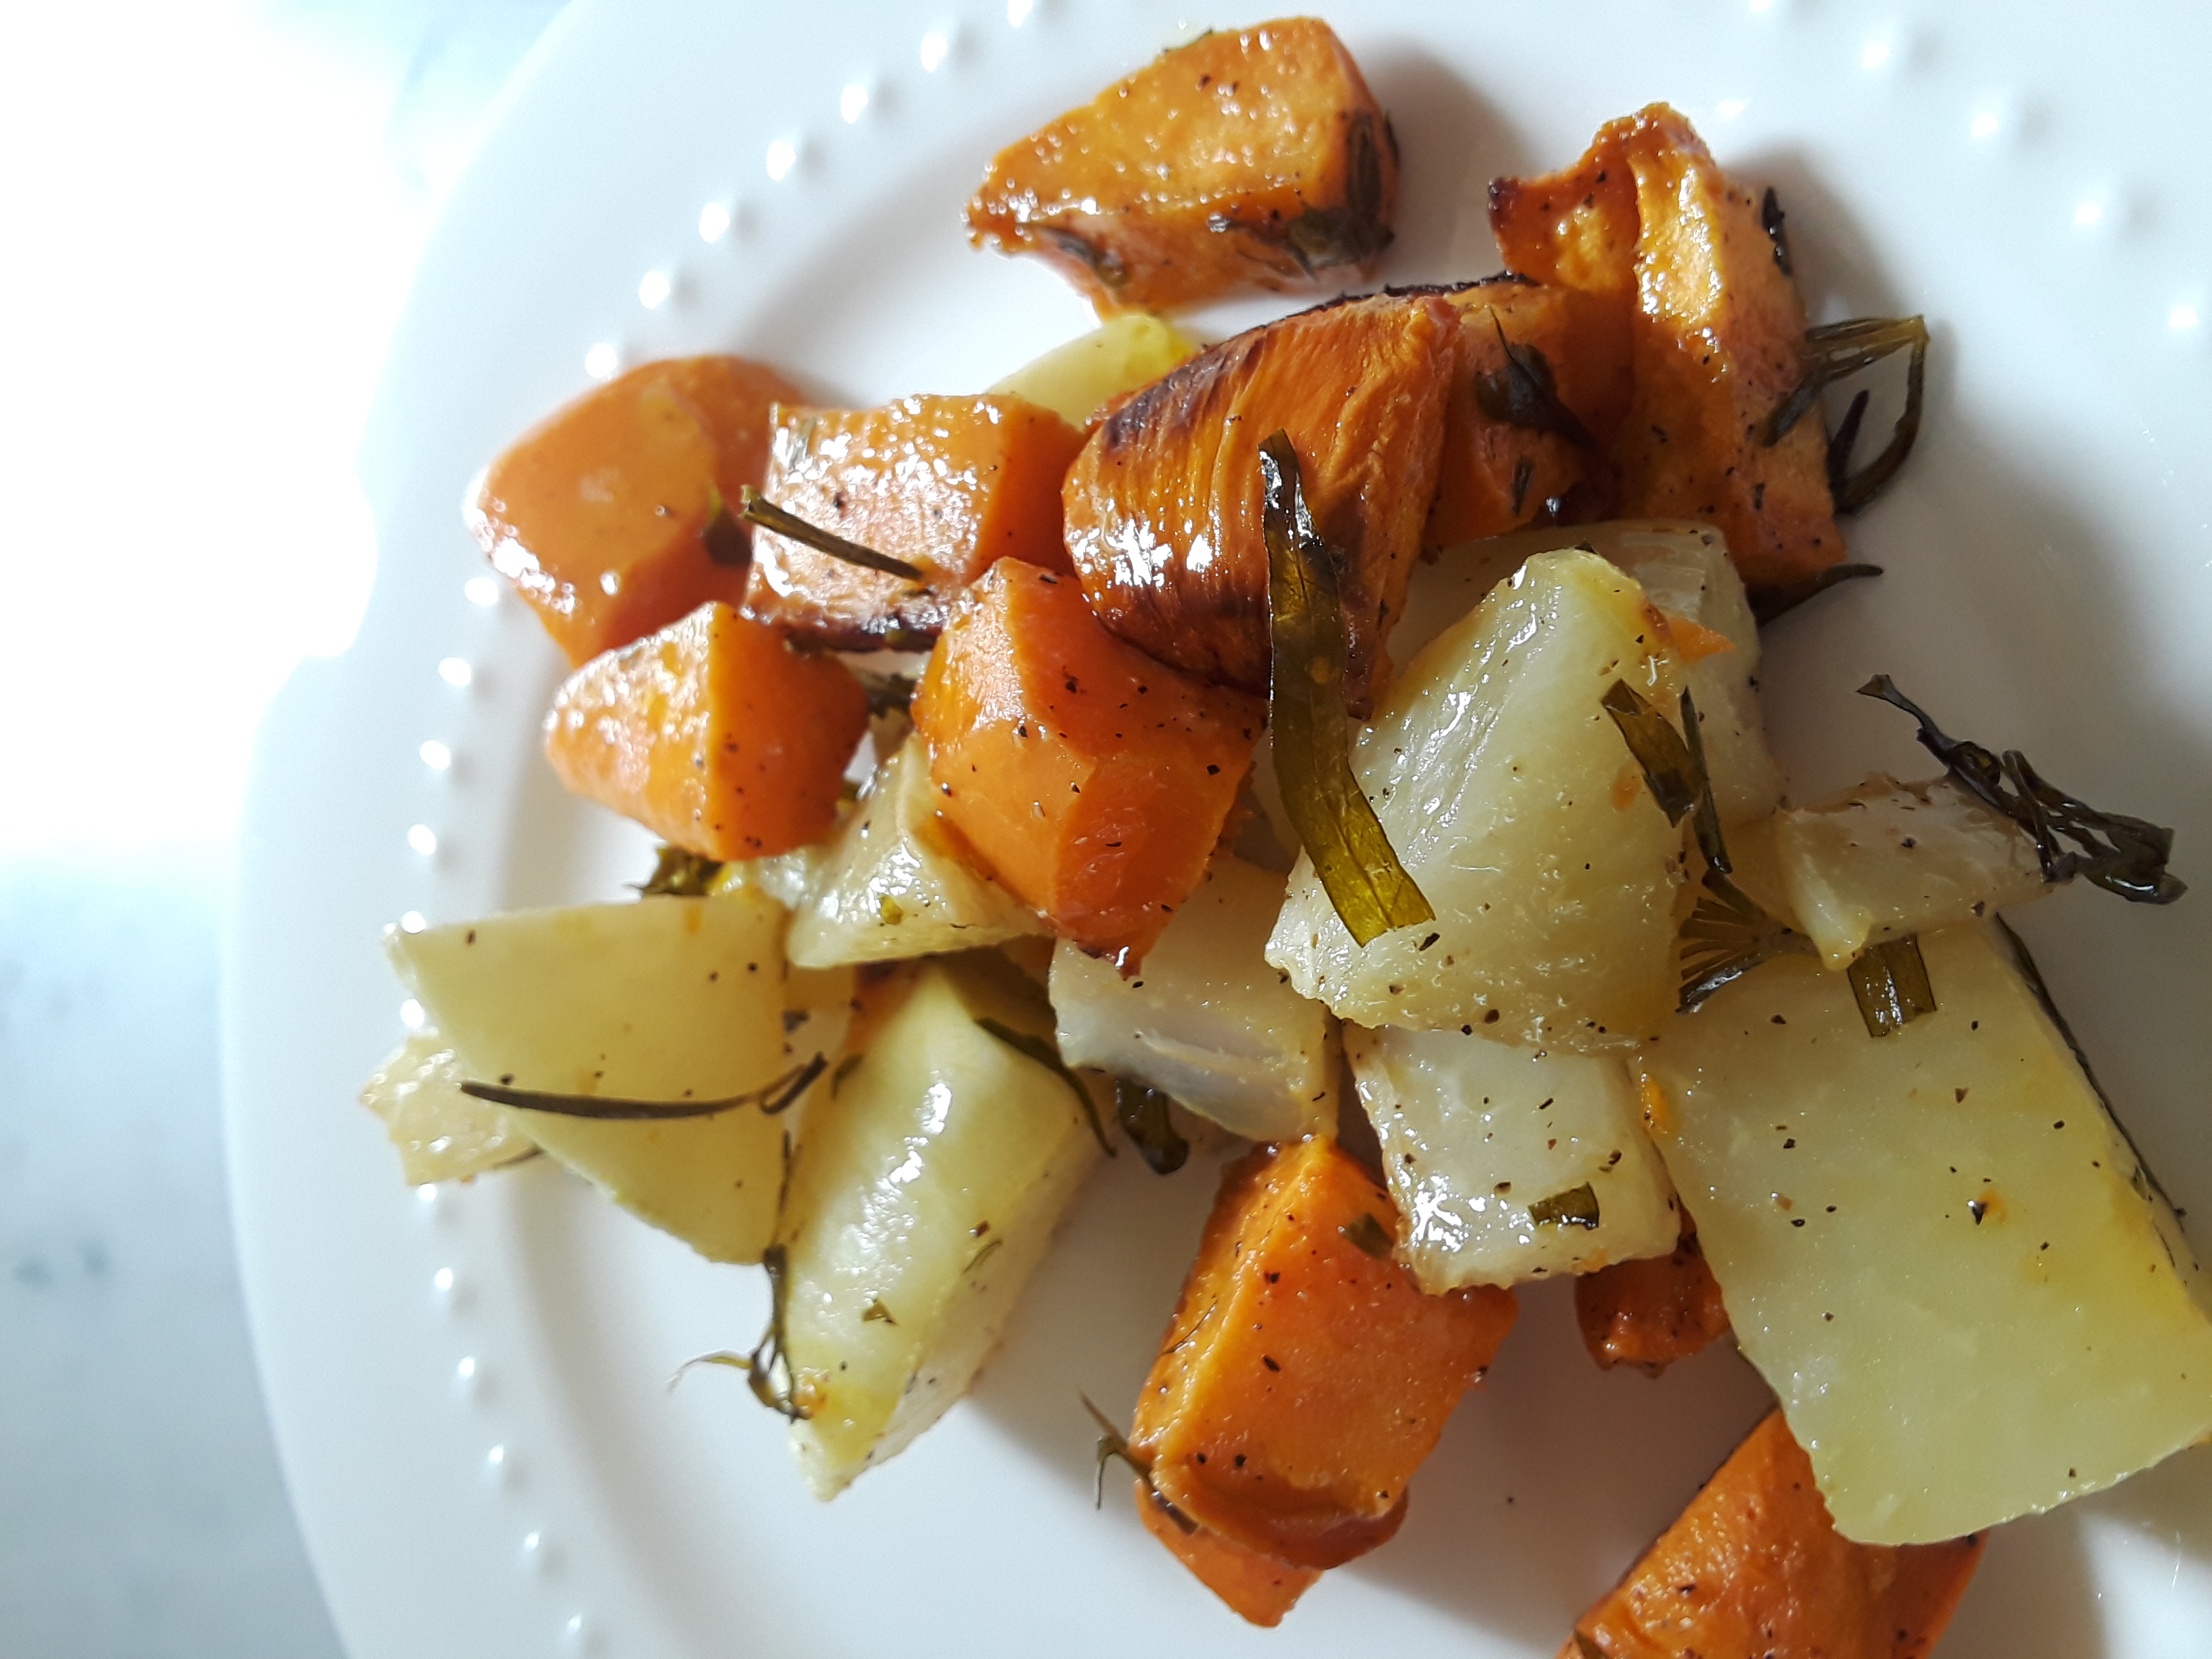 Cubes of kohlrabi and sweet potato are baked with rosemary and tarragon